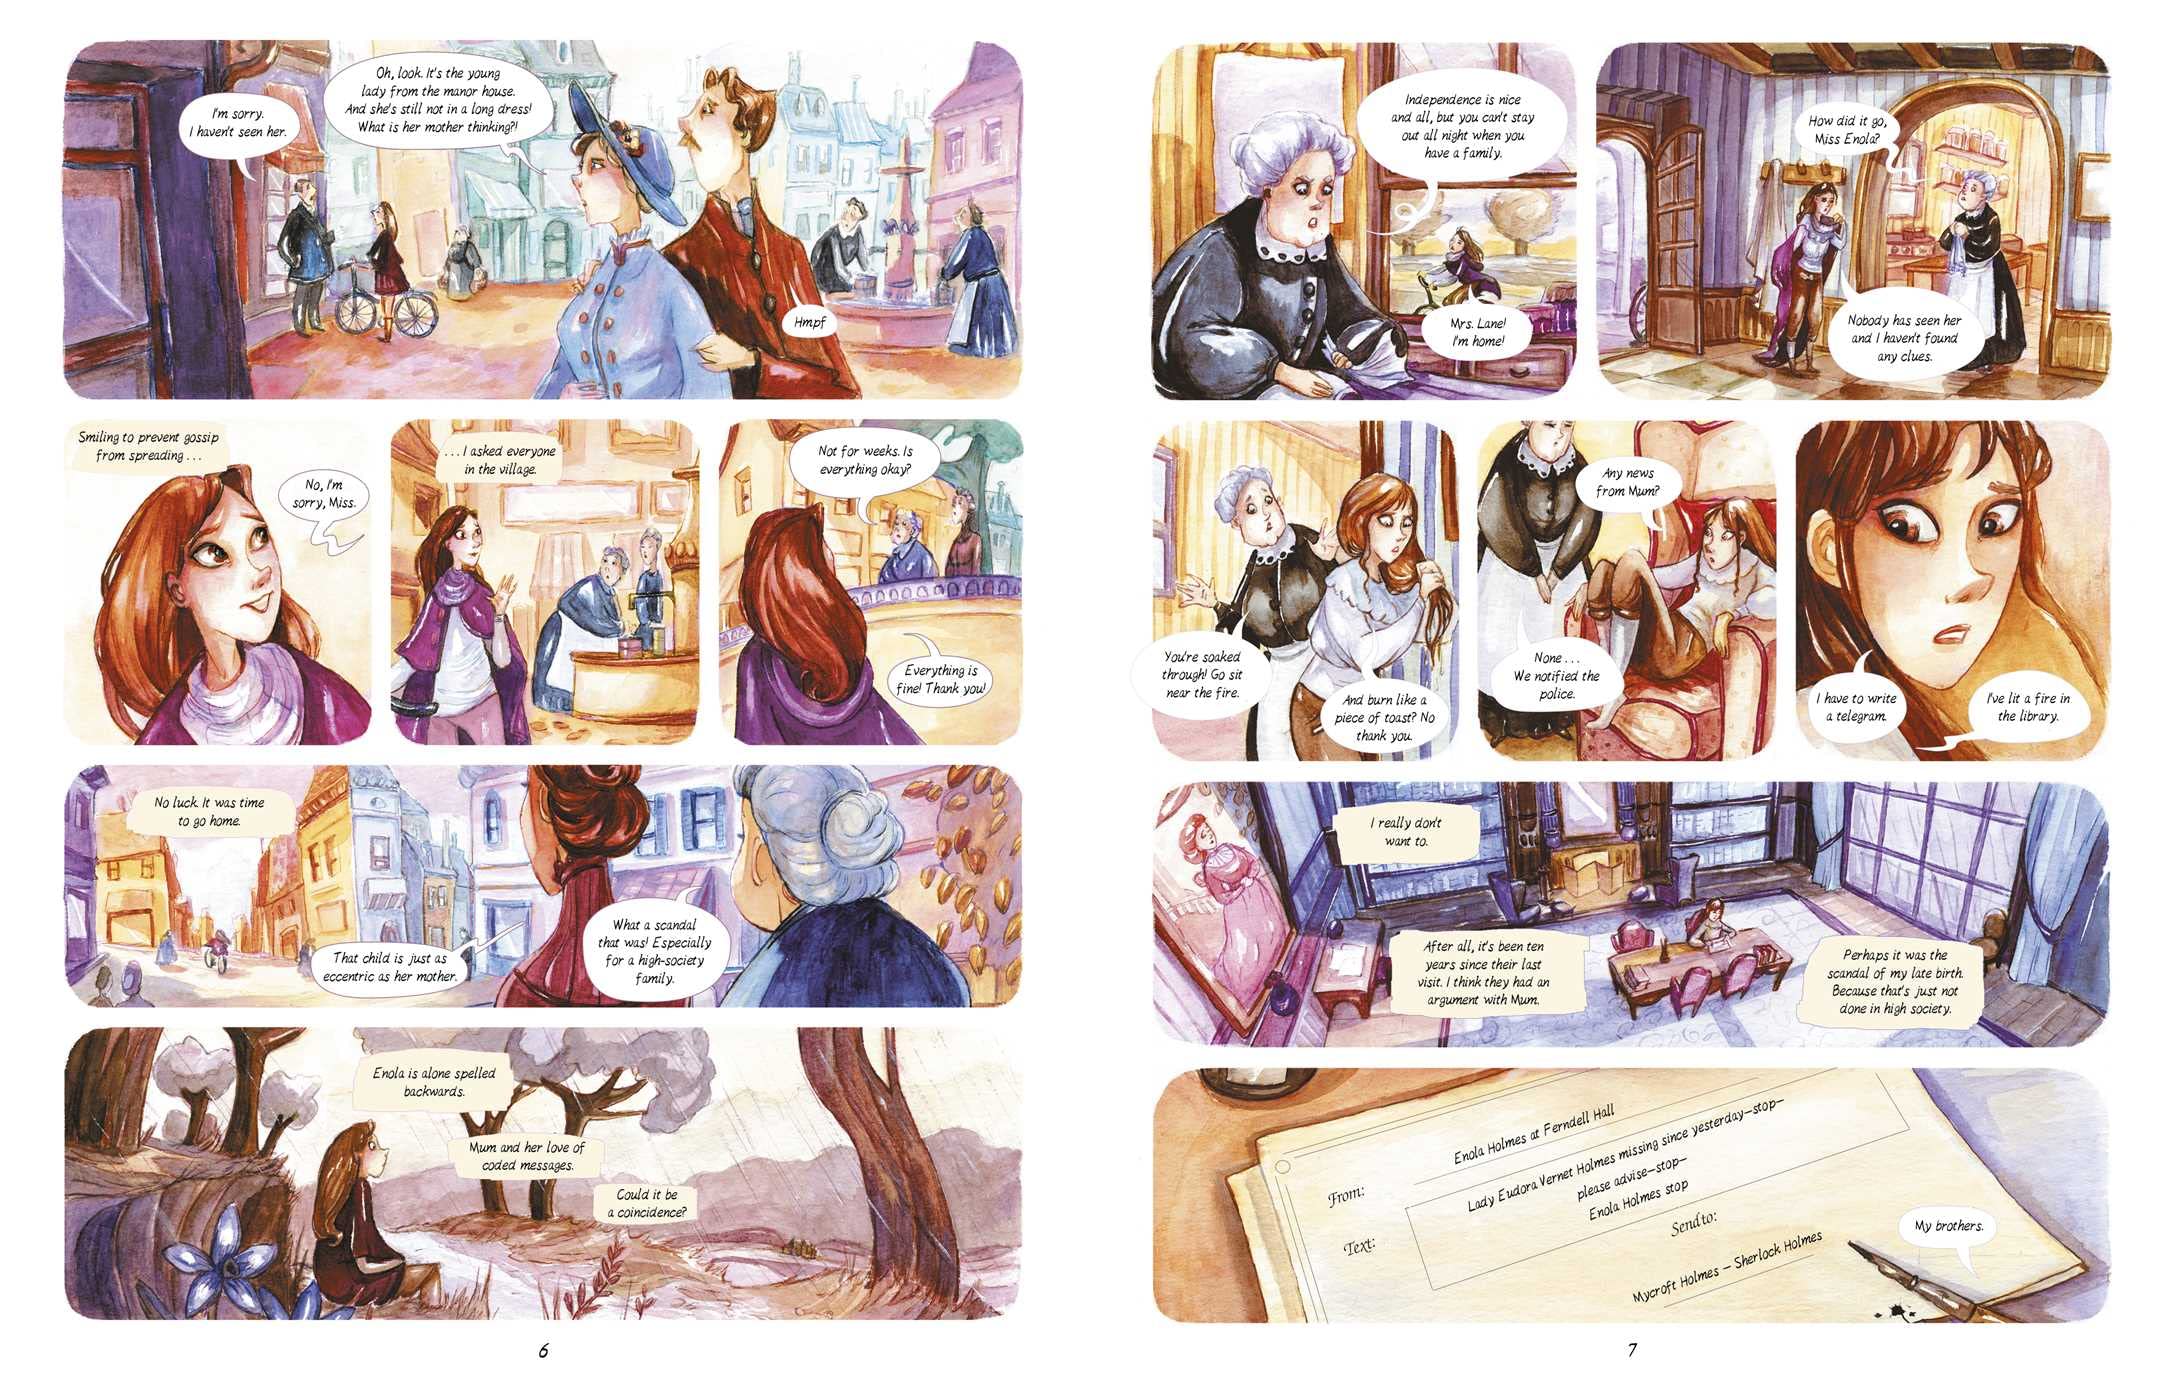 Enola Holmes: The Graphic Novels: The Case of the Missing Marquess, The Case of the Left-Handed Lady, and The Case of the Bizarre Bouquets (Volume 1)